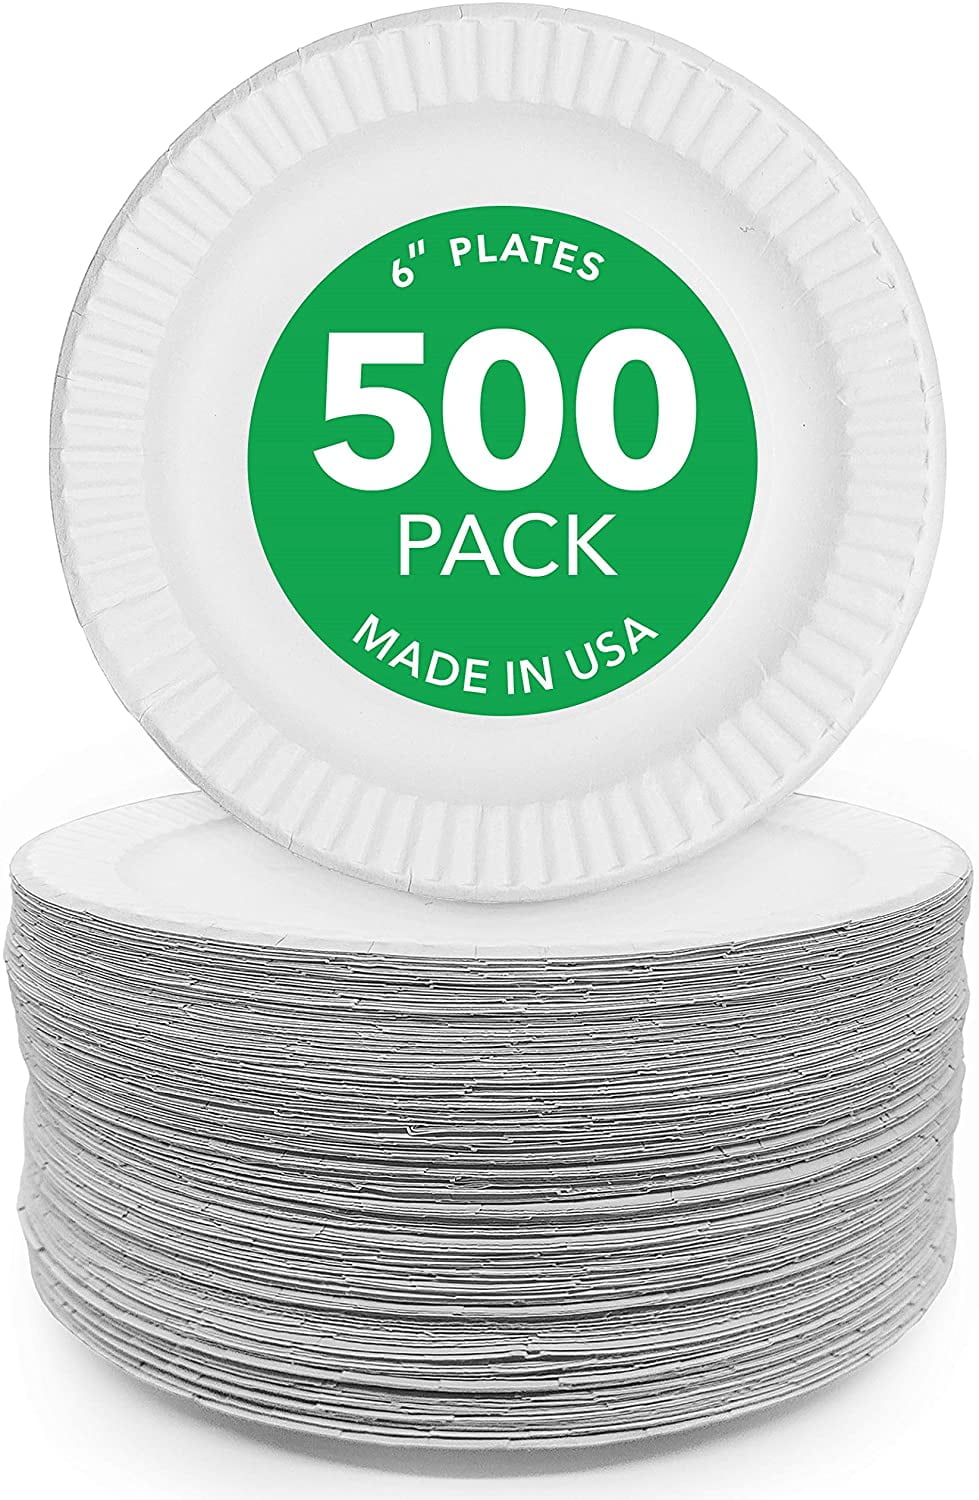  Hygloss Products 6 Uncoated White Paper Plates Bulk, 6 Inch,  1000 pack, Disposable Plates For Food, Dessert Or Crafts : Everything Else